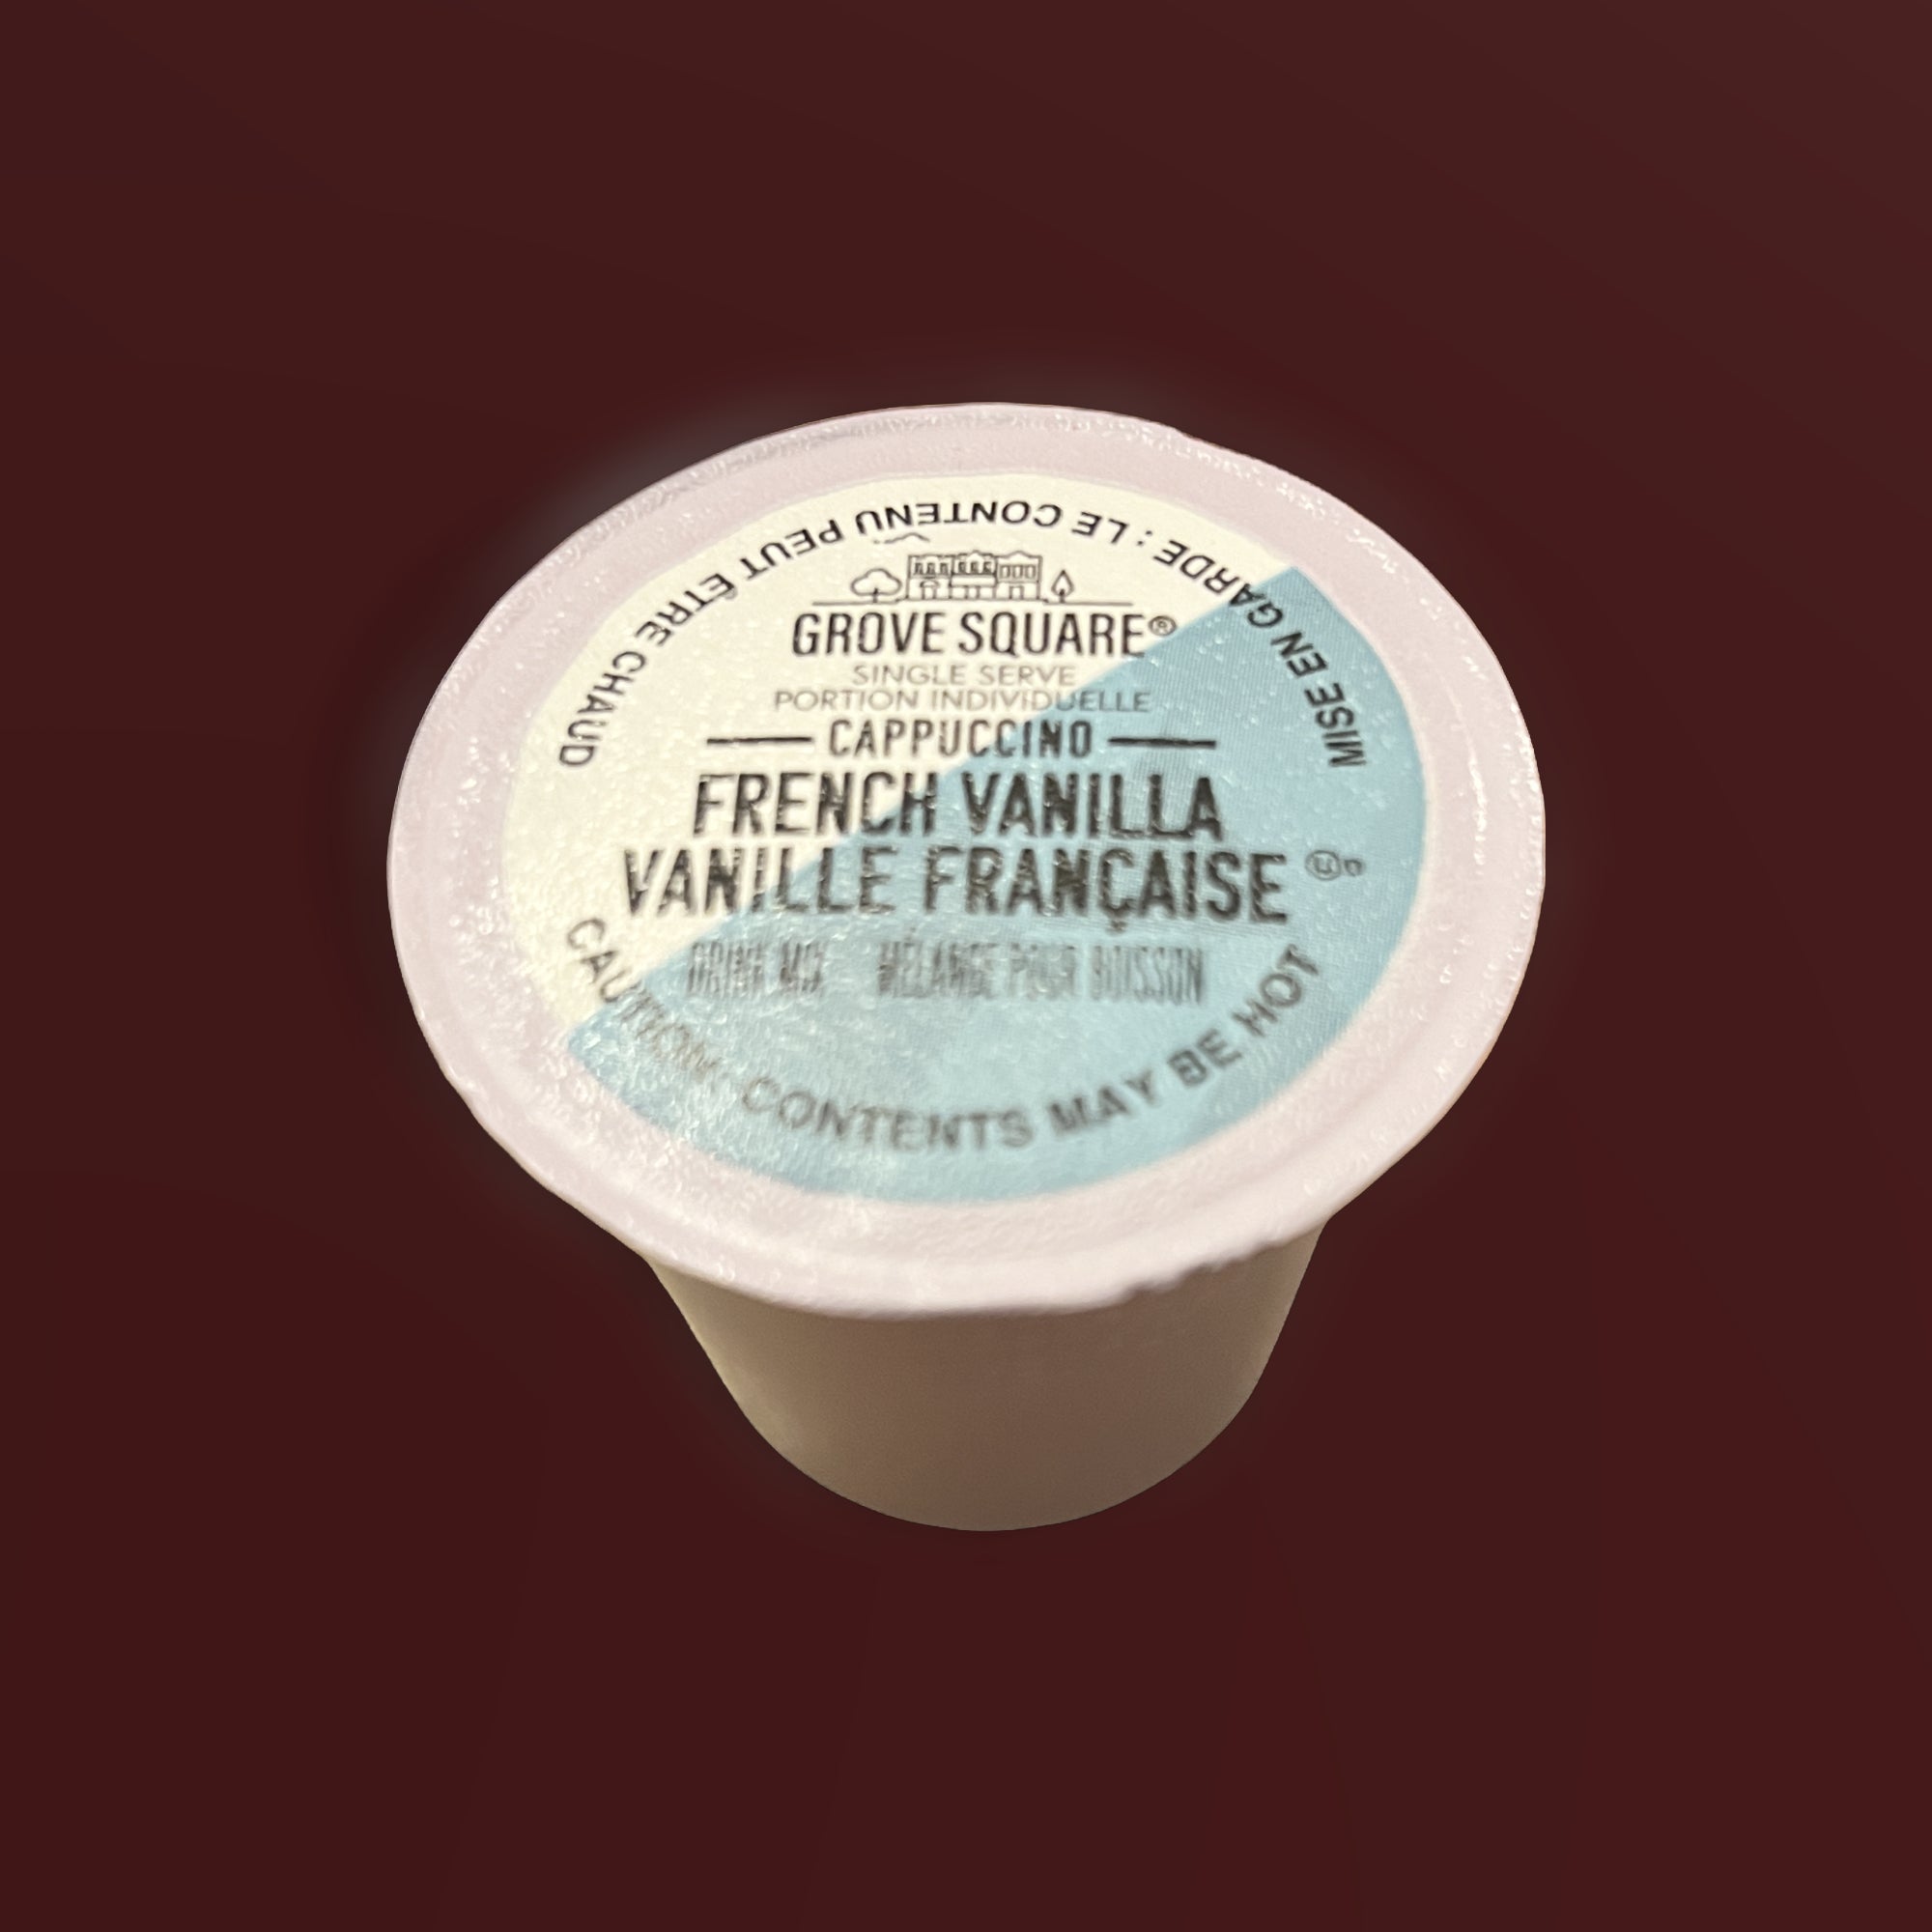 Cappuccino vanille française, capsules K-Cup